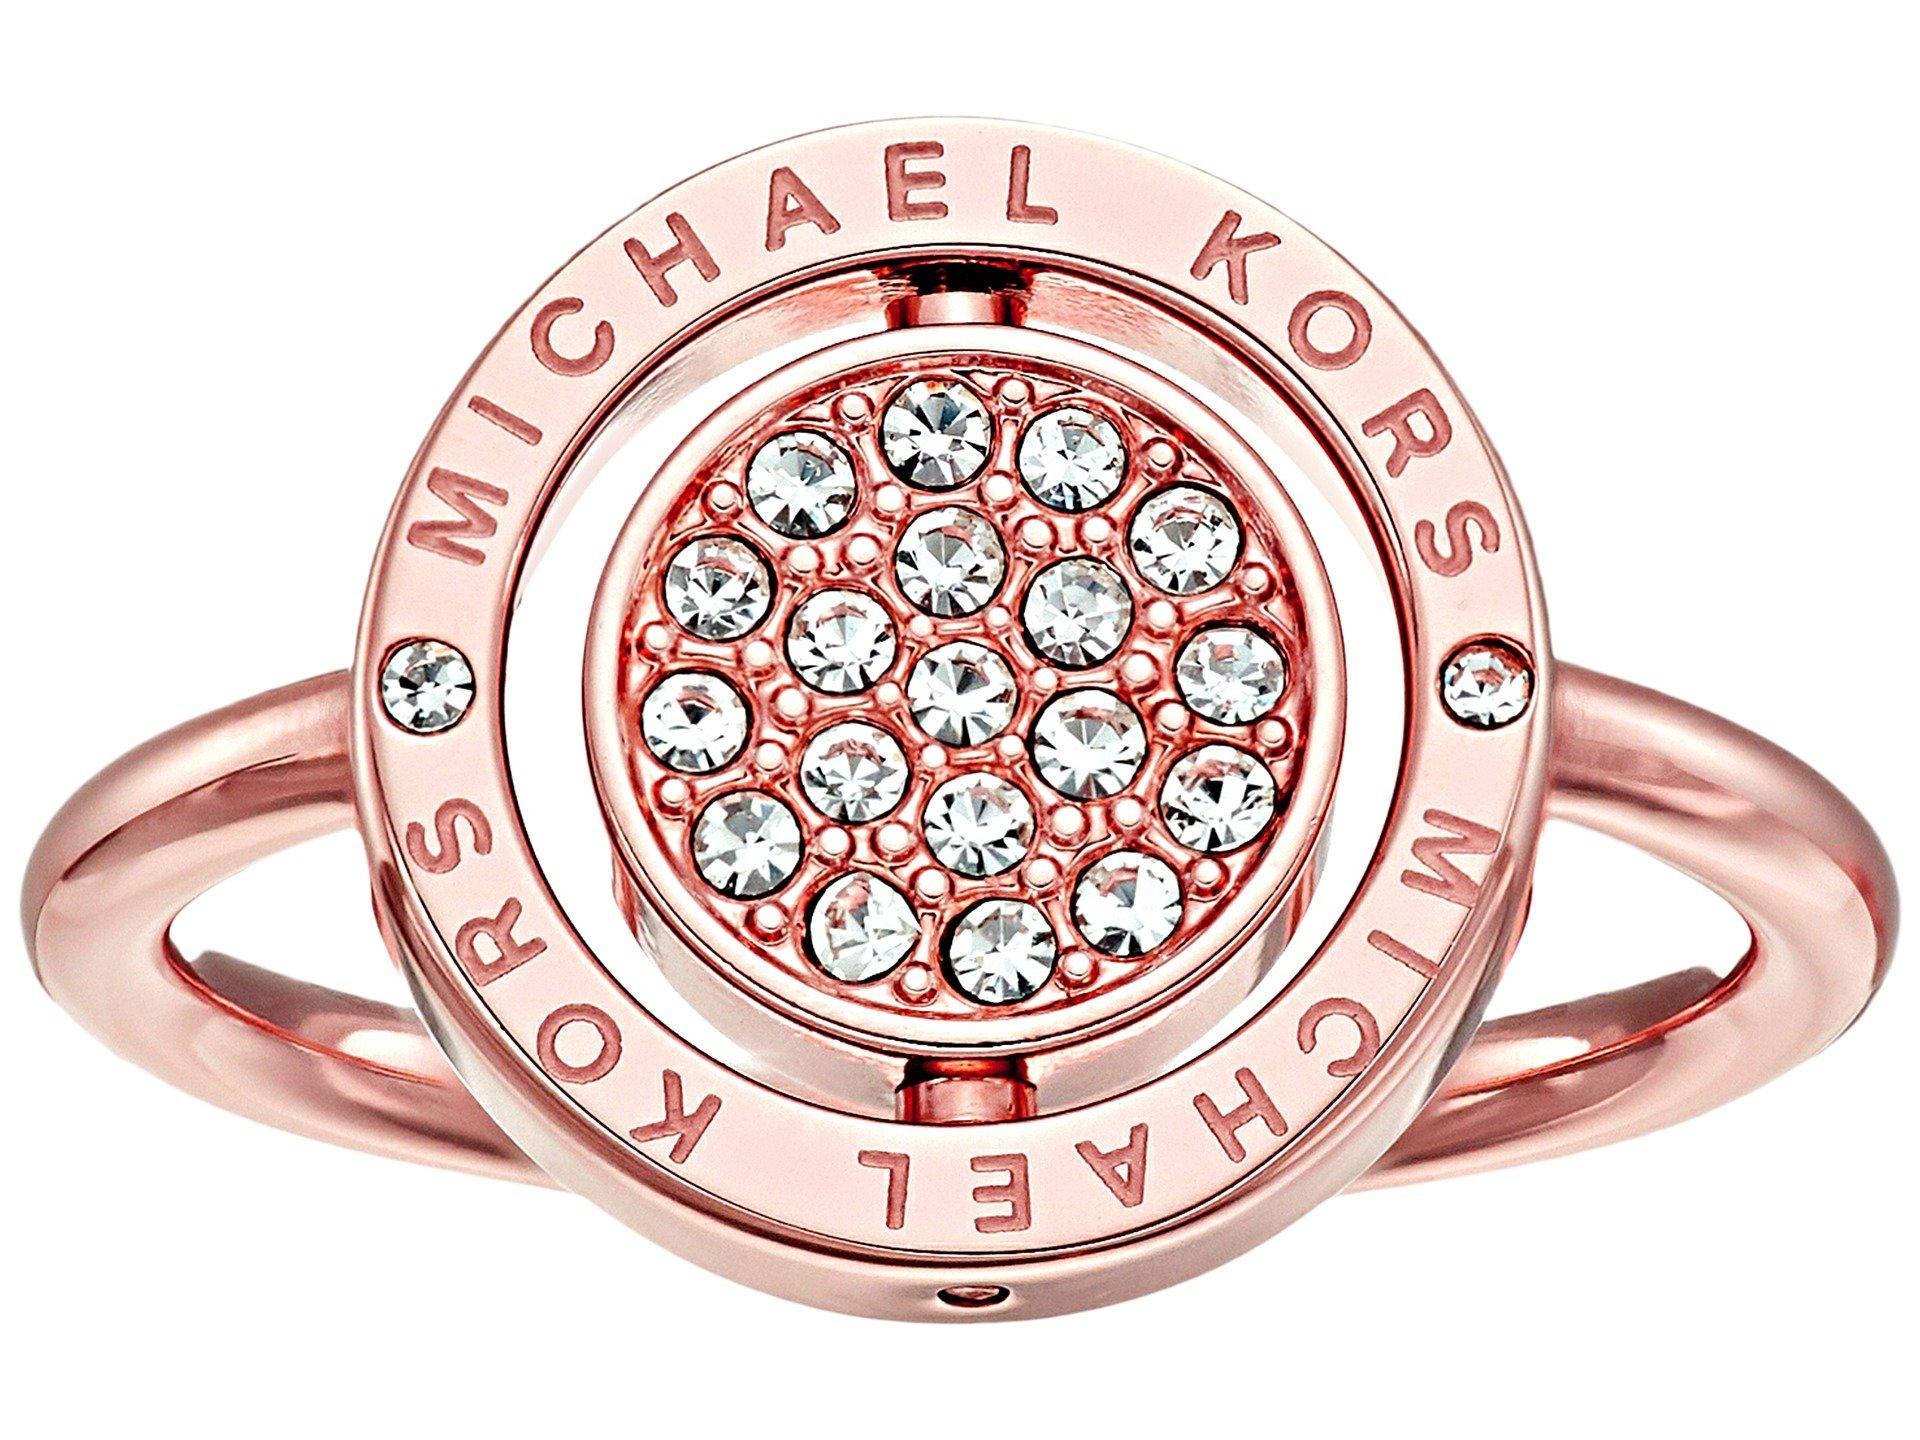 Michael Kors 1920X1440 Wallpaper and Background Image